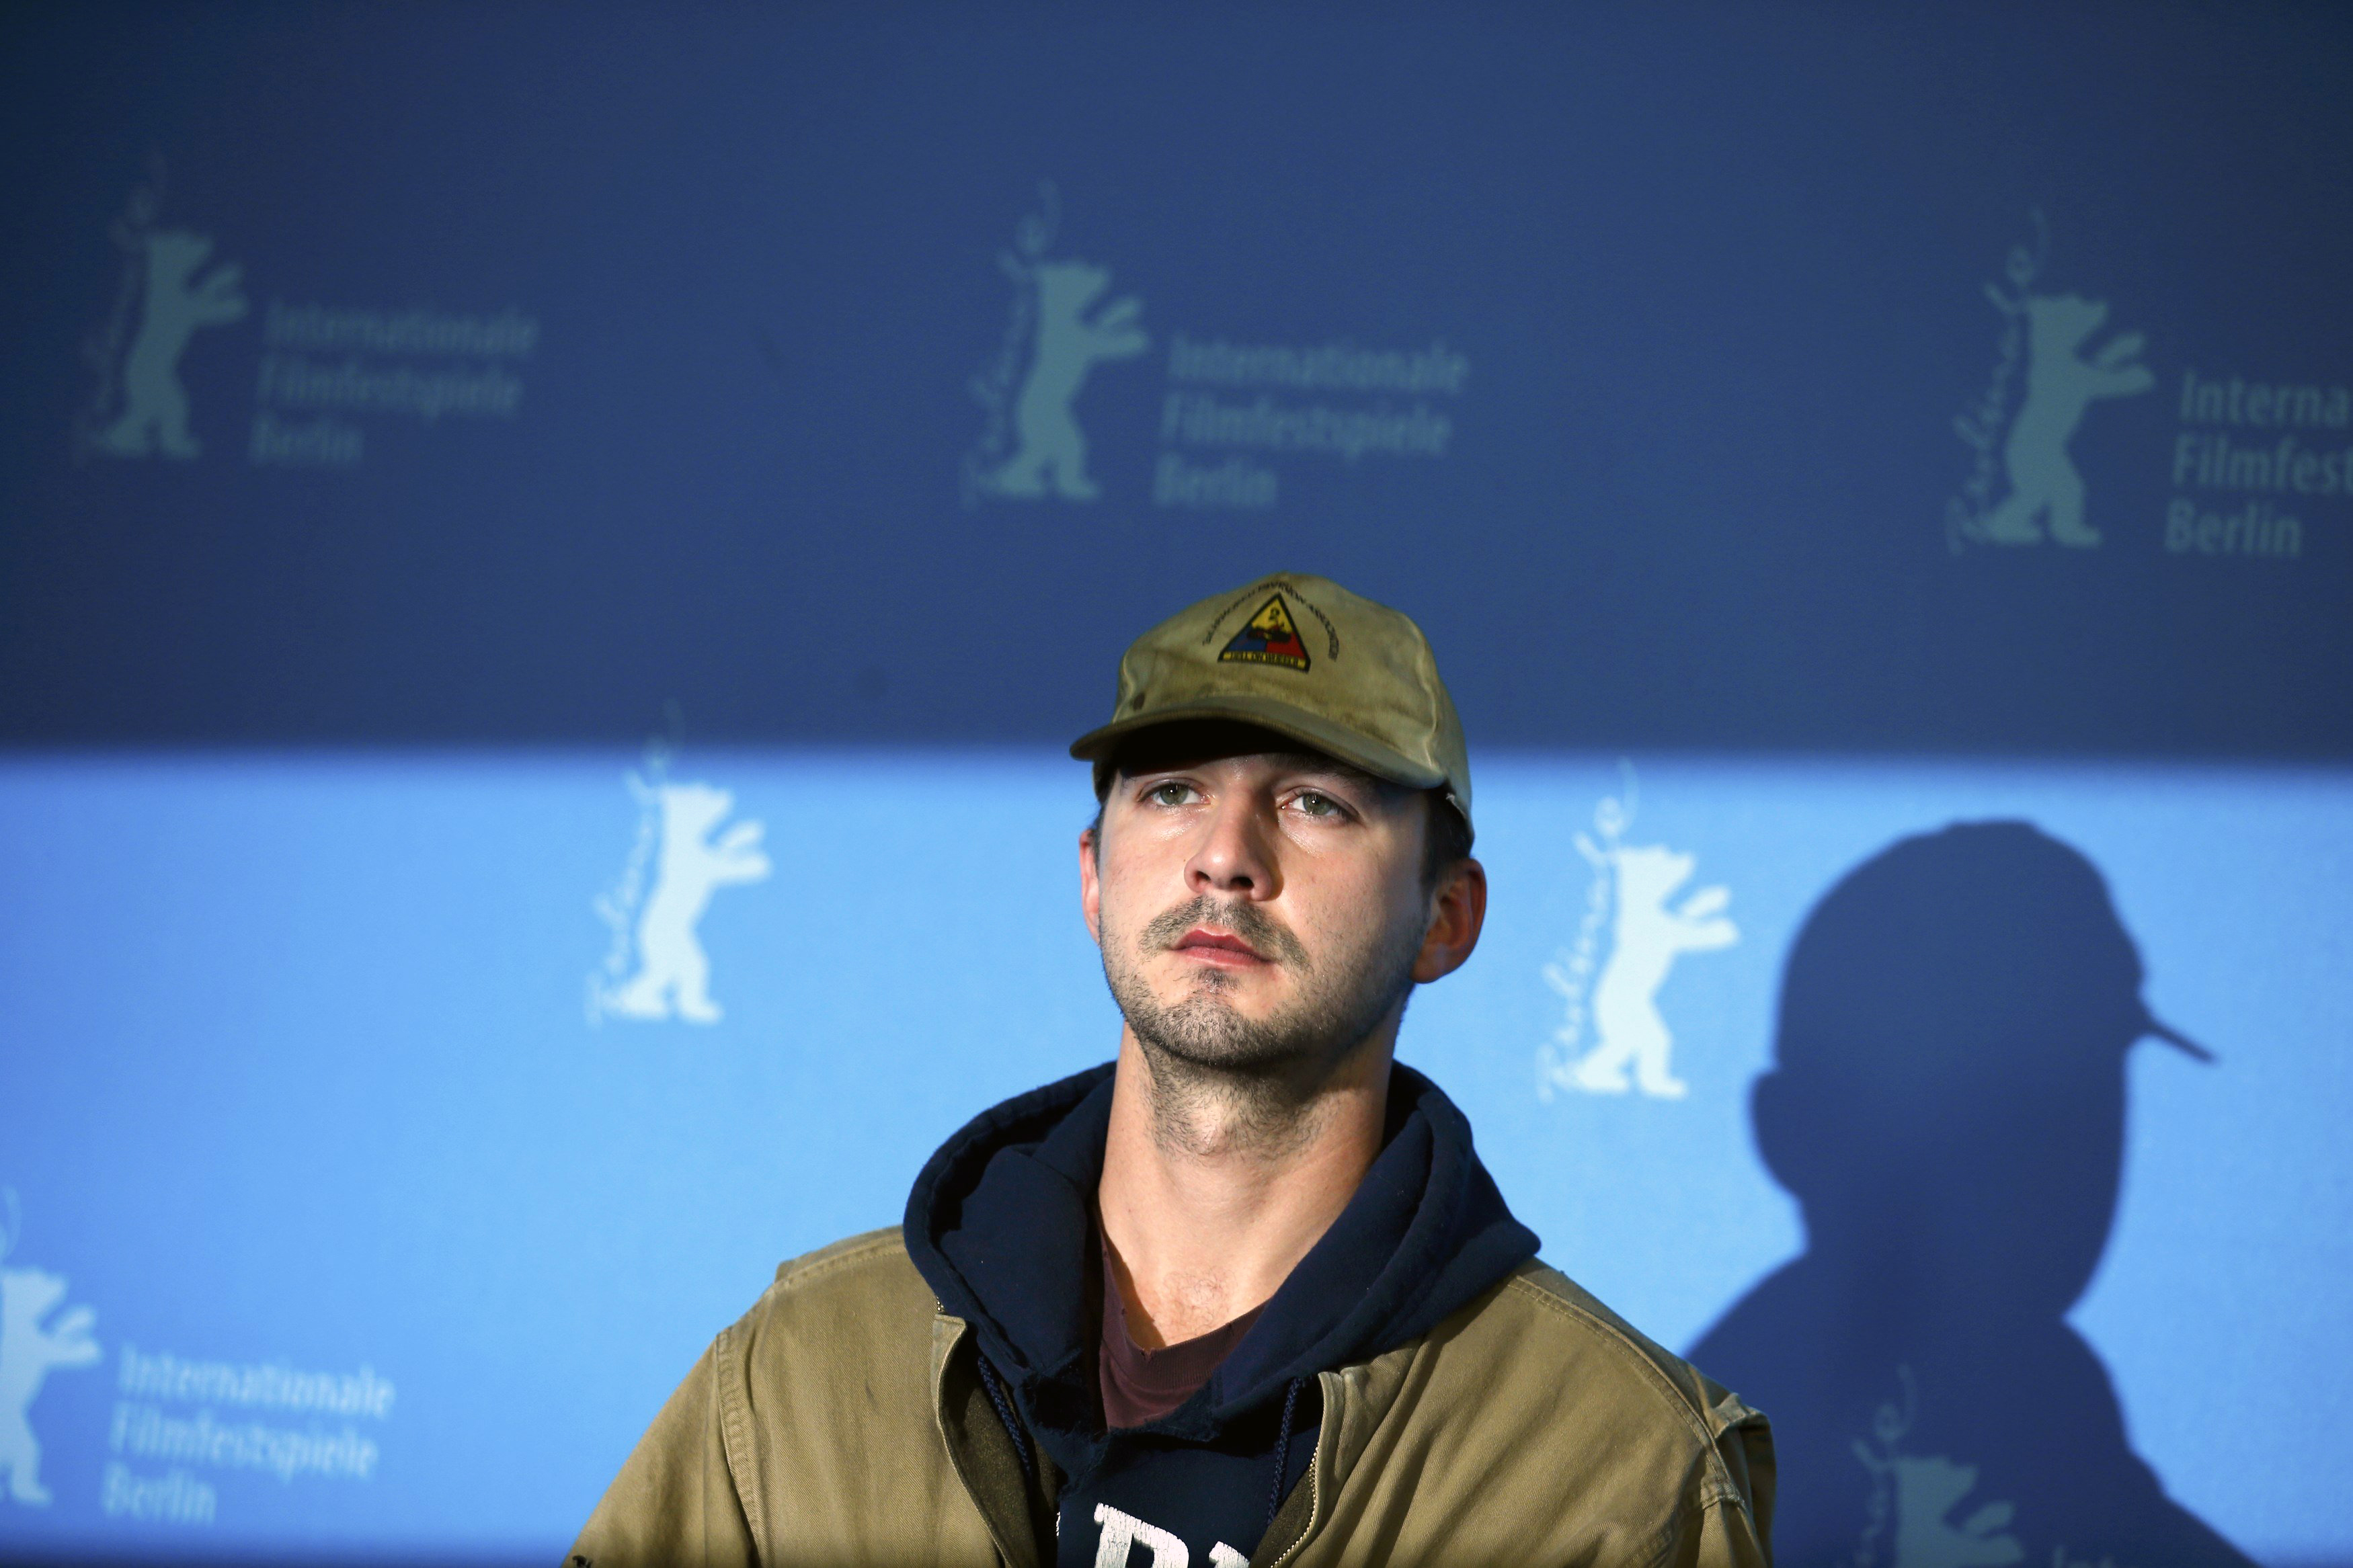 Cast member Shia LaBeouf poses during a photocall to promote the movie "Nymphomaniac Volume I" during the 64th Berlinale International Film Festival in Berlin, February 9, 2014. (Thomas Peter—Reuters)